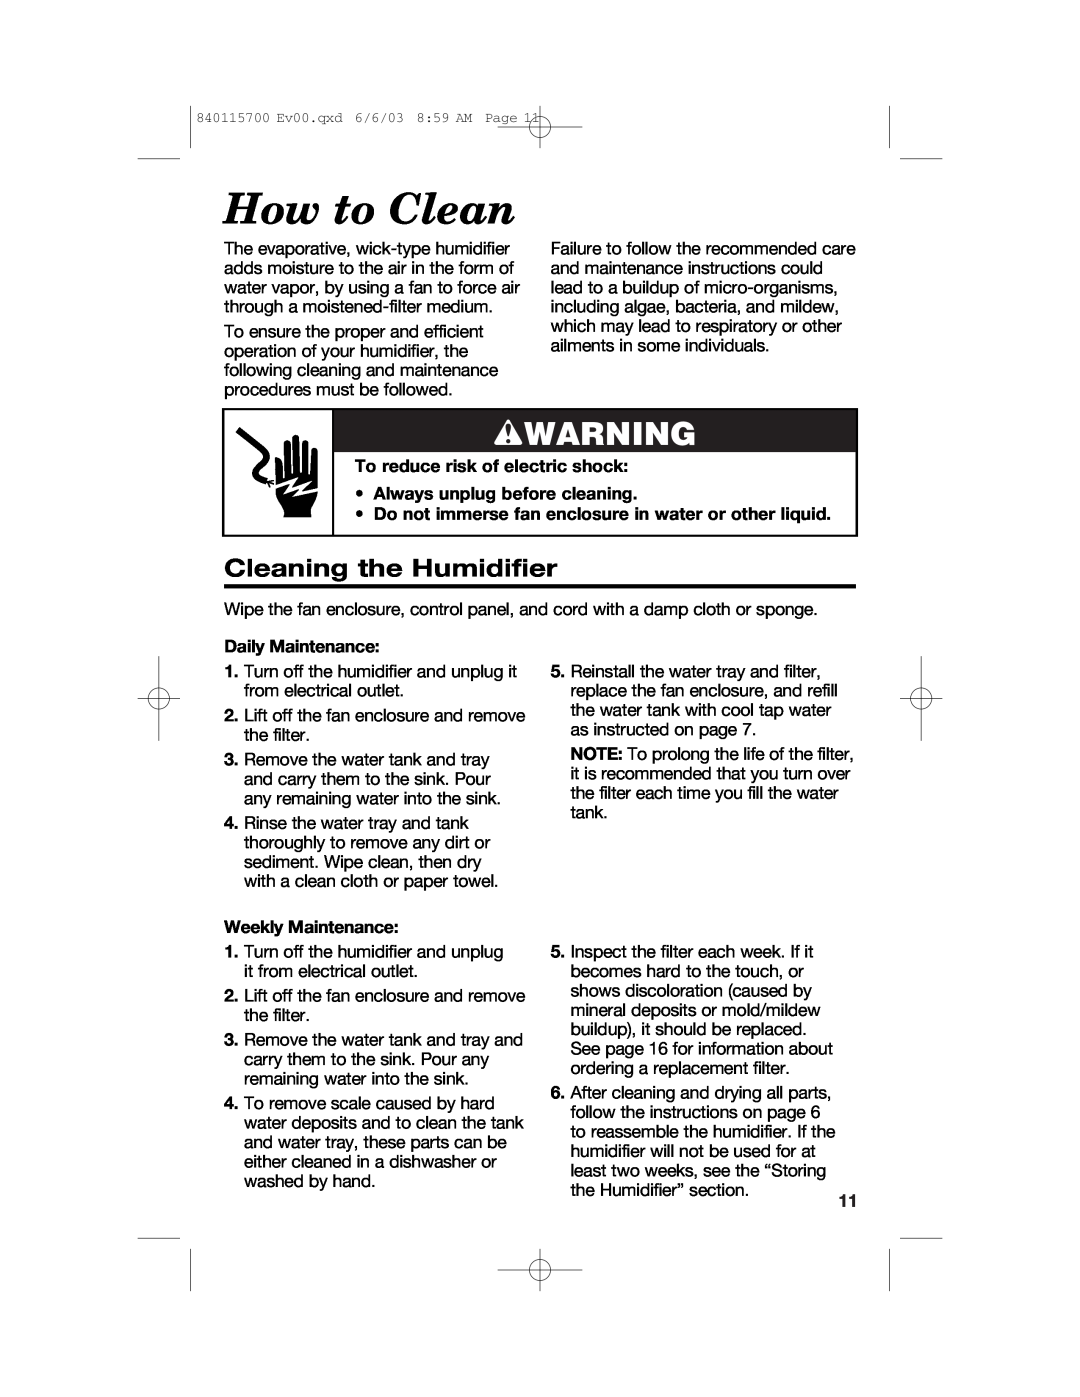 Hamilton Beach 05910 How to Clean, wWARNING, Cleaning the Humidifier, To reduce risk of electric shock, Daily Maintenance 